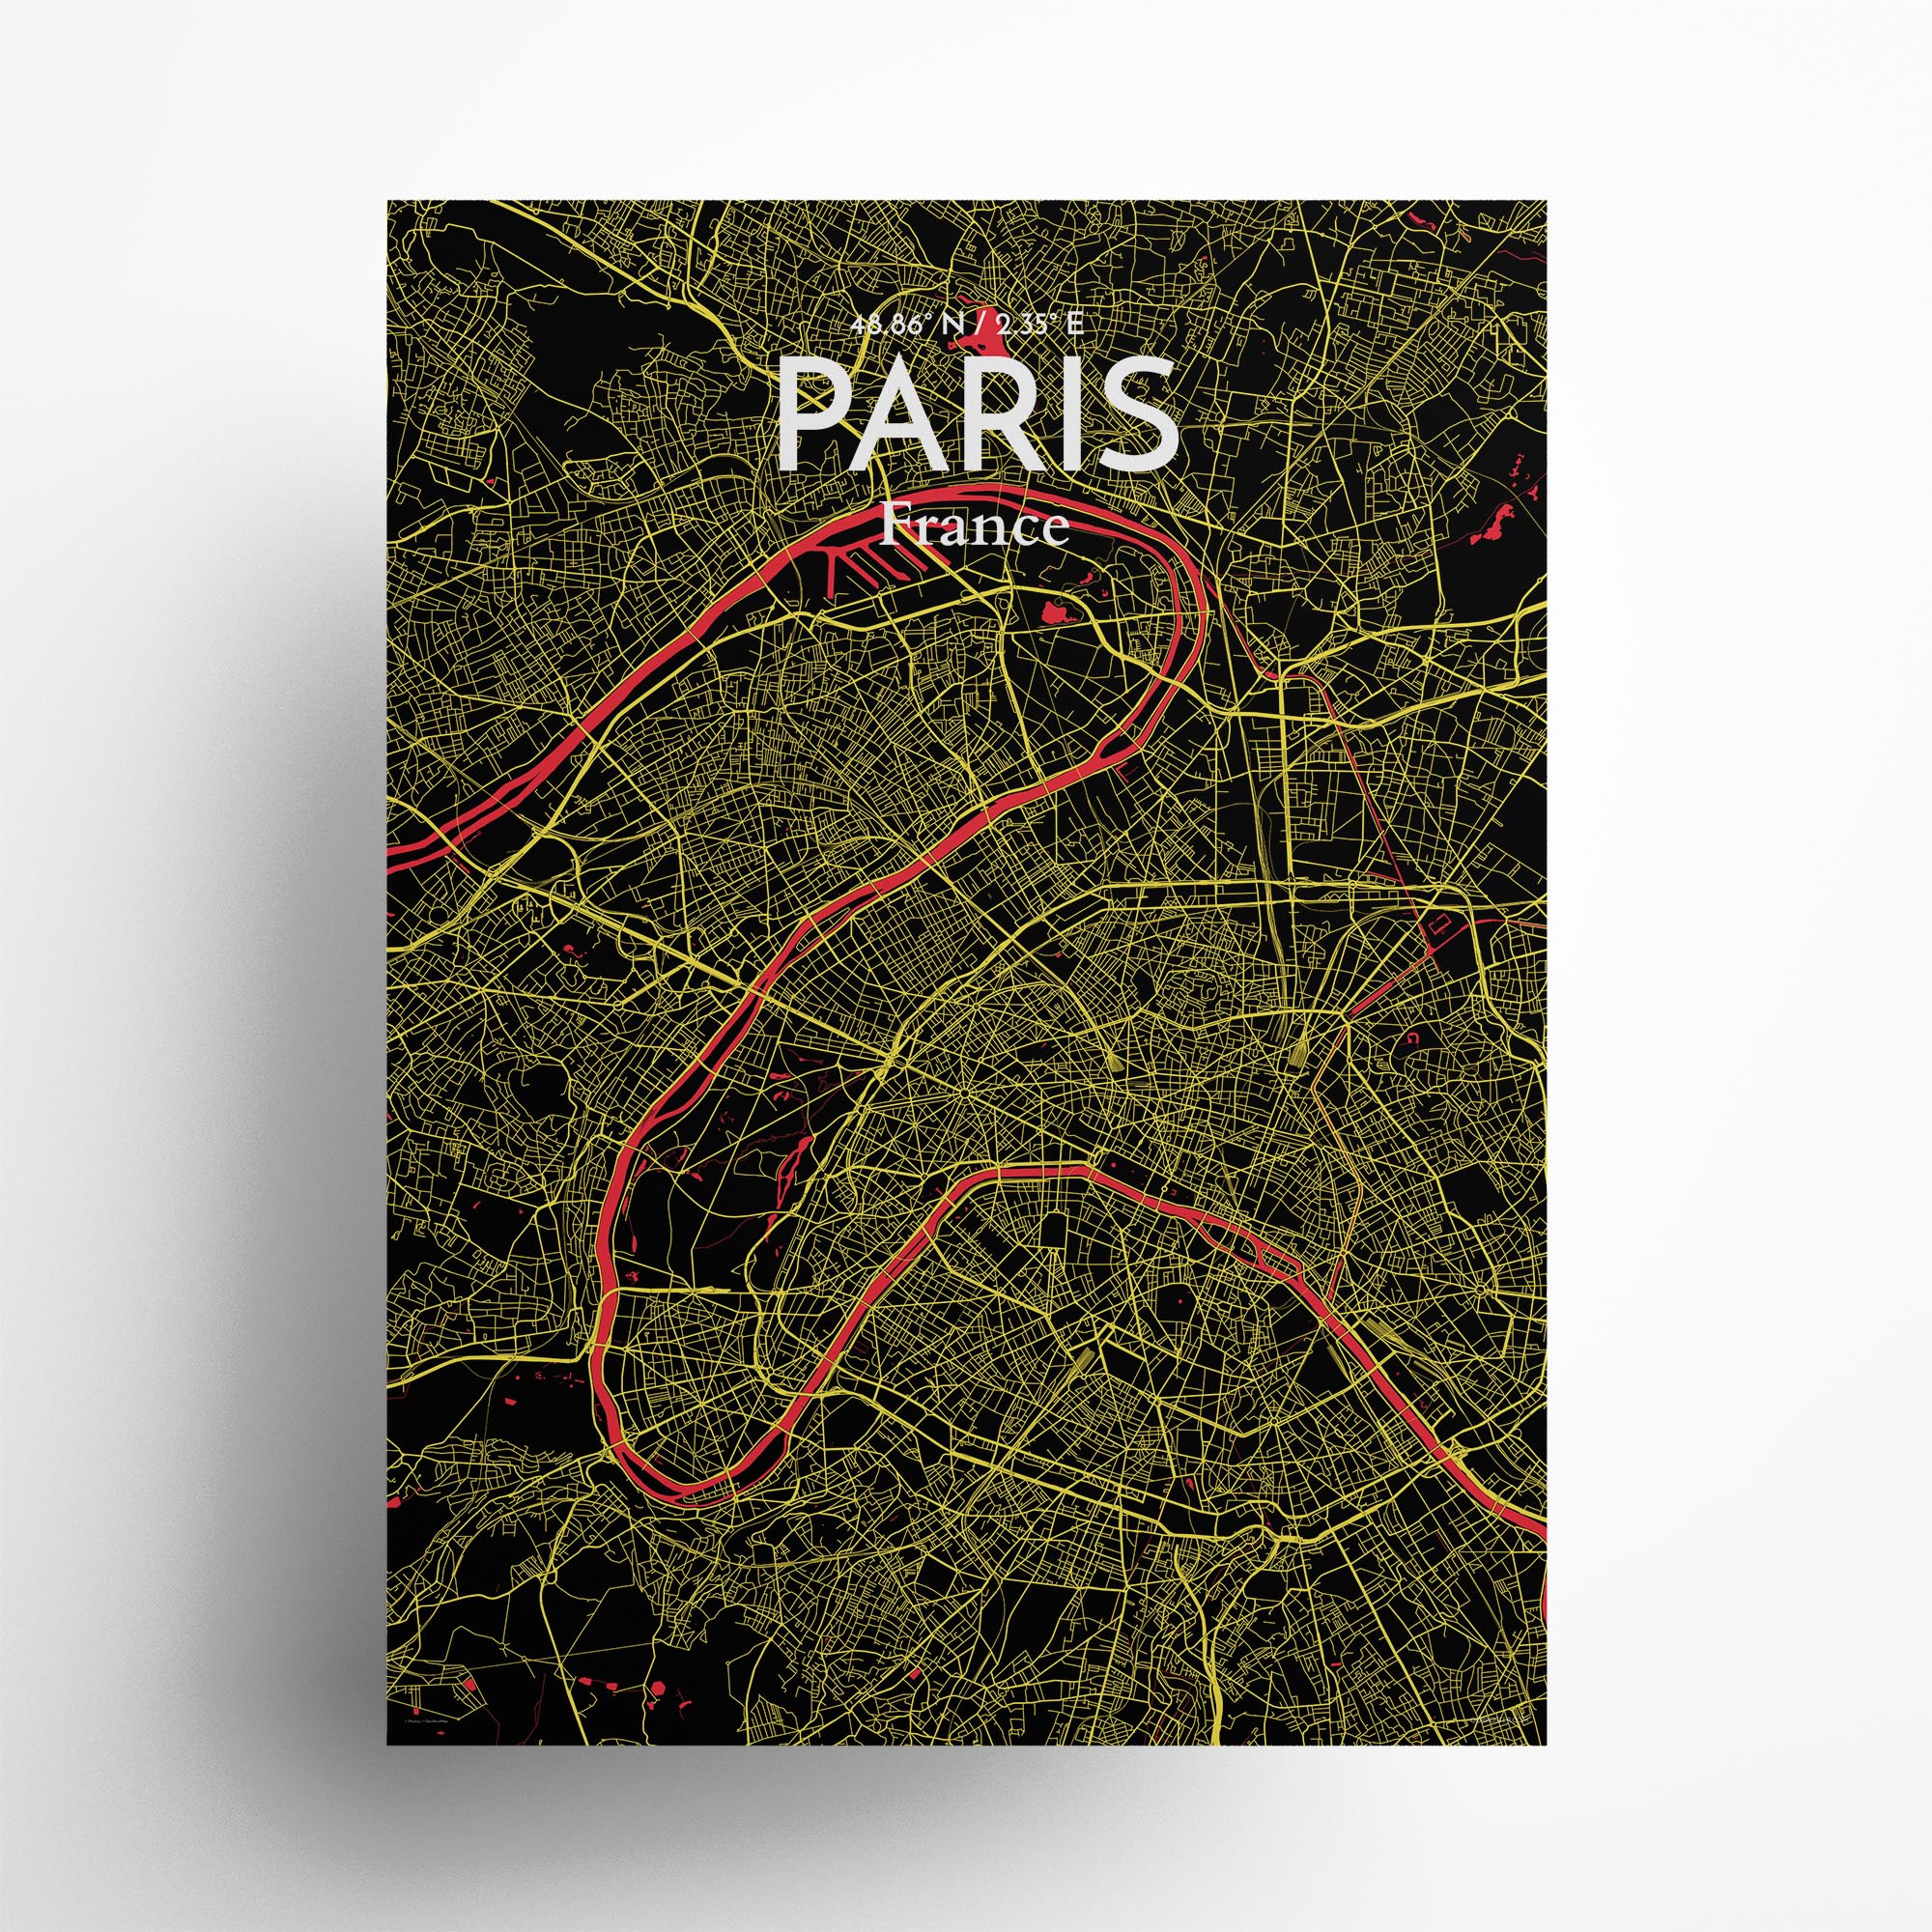 Paris city map poster in Contrast of size 18" x 24"